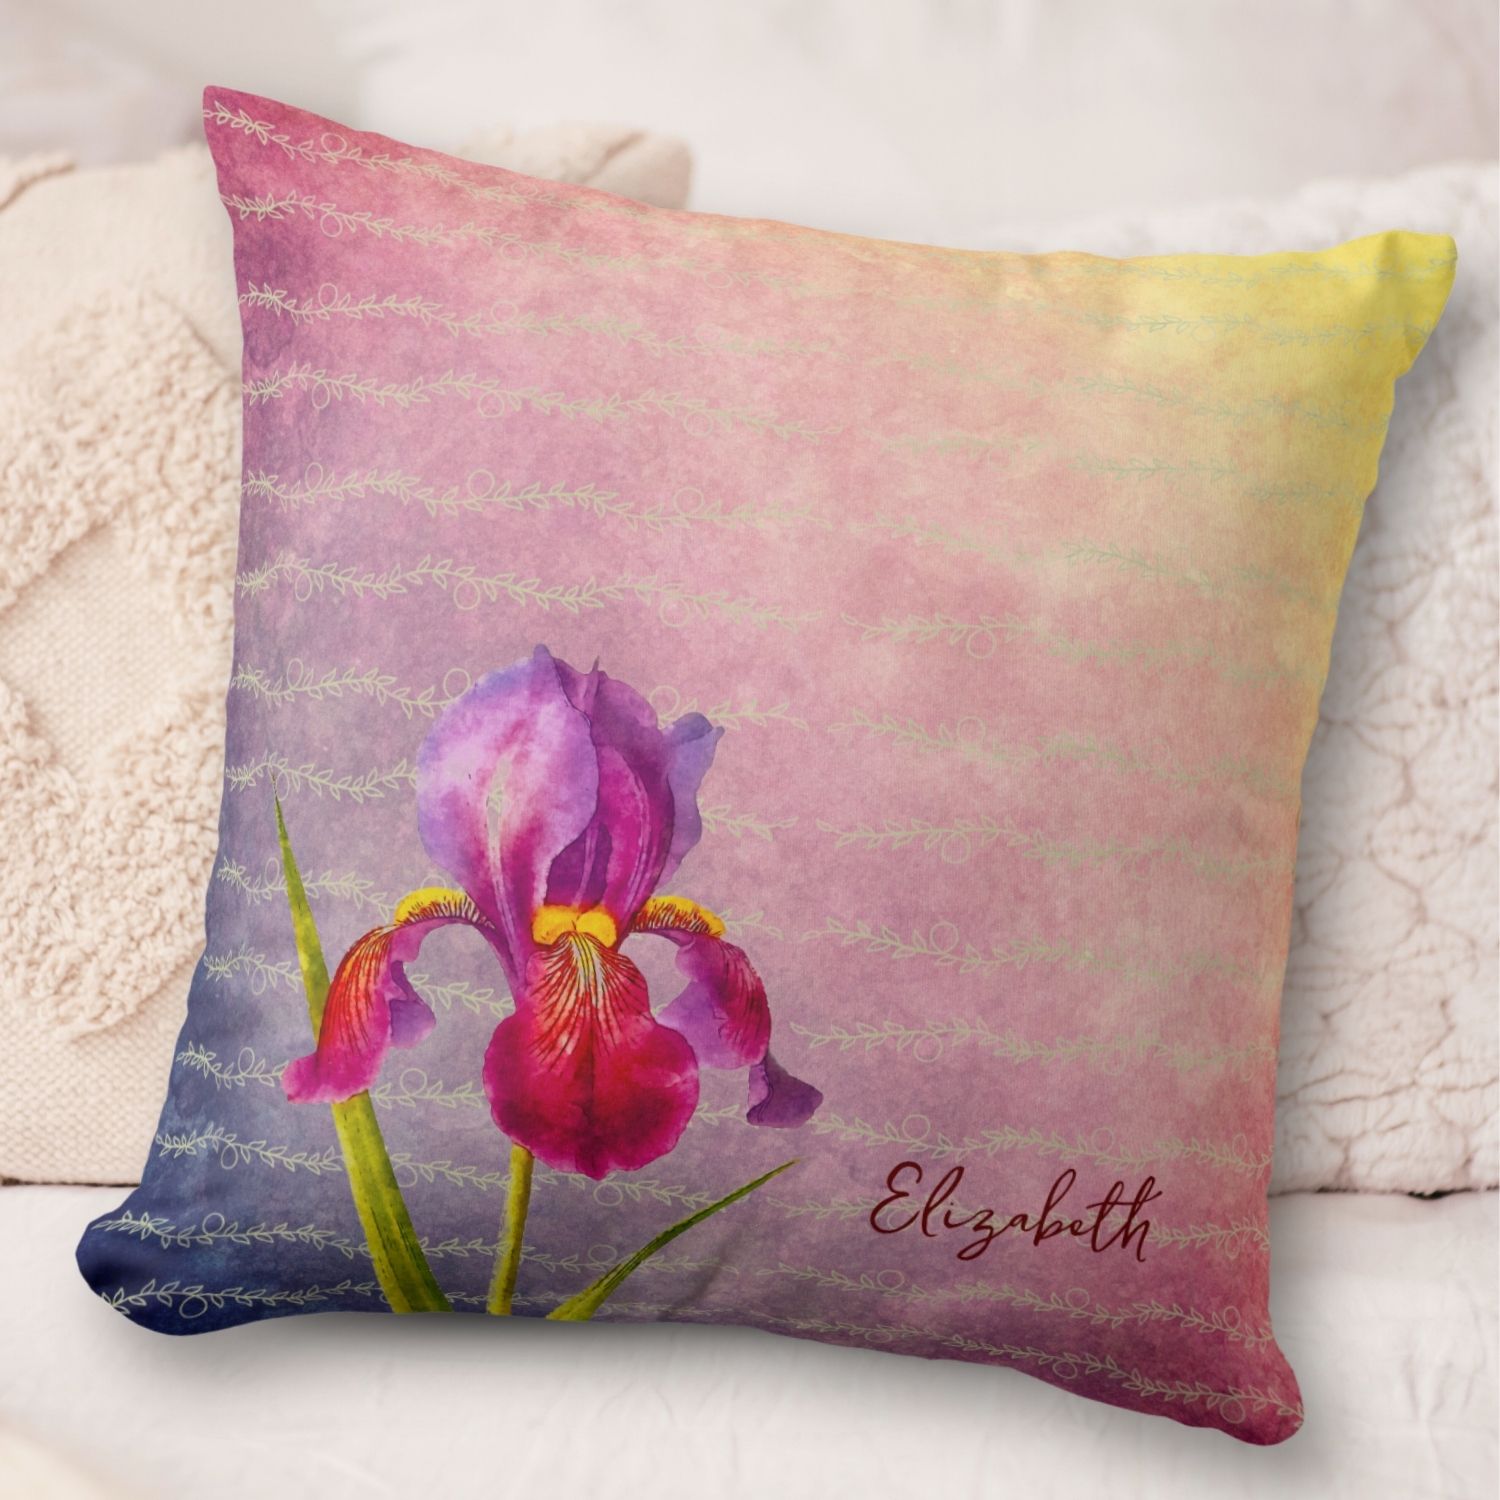 ALT text: A vintage throw pillow featuring a detailed illustration of iris flowers on a washed-out violet background. The flowers are depicted in a classic, elegant style with intricate lines and soft, muted colors, enhancing the antique look. The washed-out violet background adds a subtle, aged charm, making this throw pillow a perfect decorative piece for adding a touch of vintage elegance to any room.